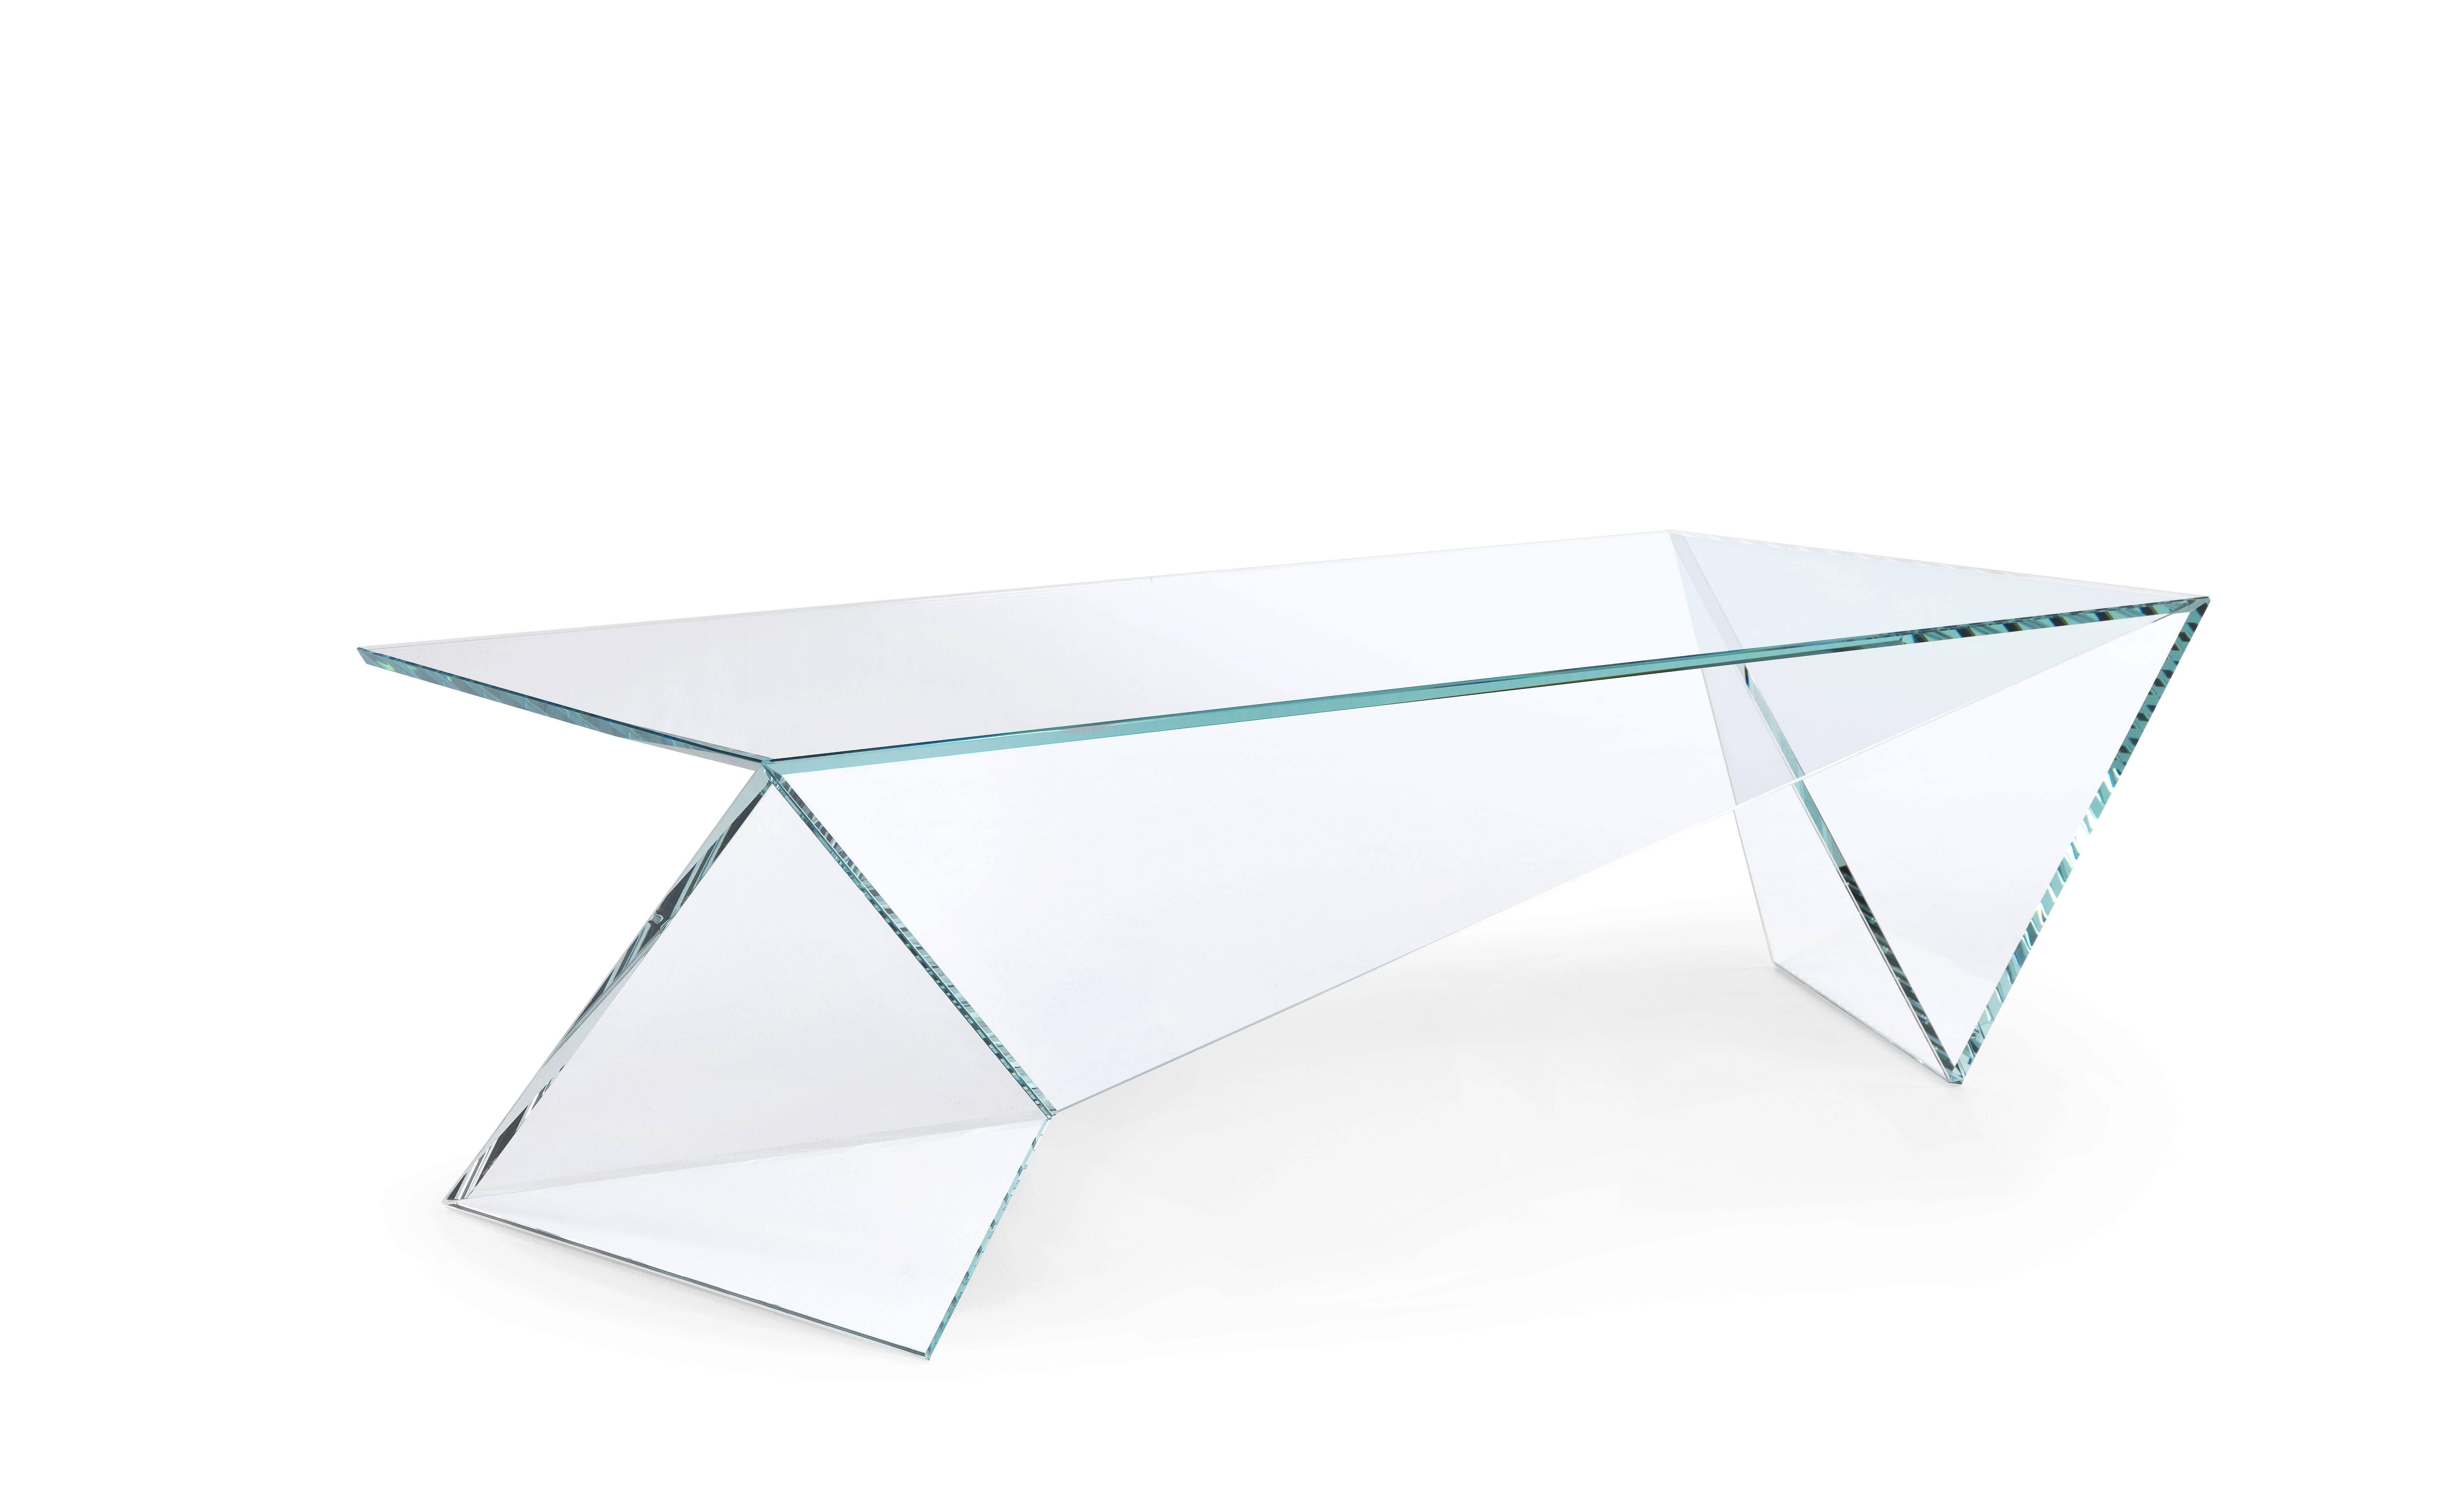 The coffee table 'Origami' is made of extra-clear crystal glass. Each sheet of extra-clear crystal glass is cut and ground with extreme precision, then the sheets are assembled by hand, having to fit together perfectly, the gluing operation requires